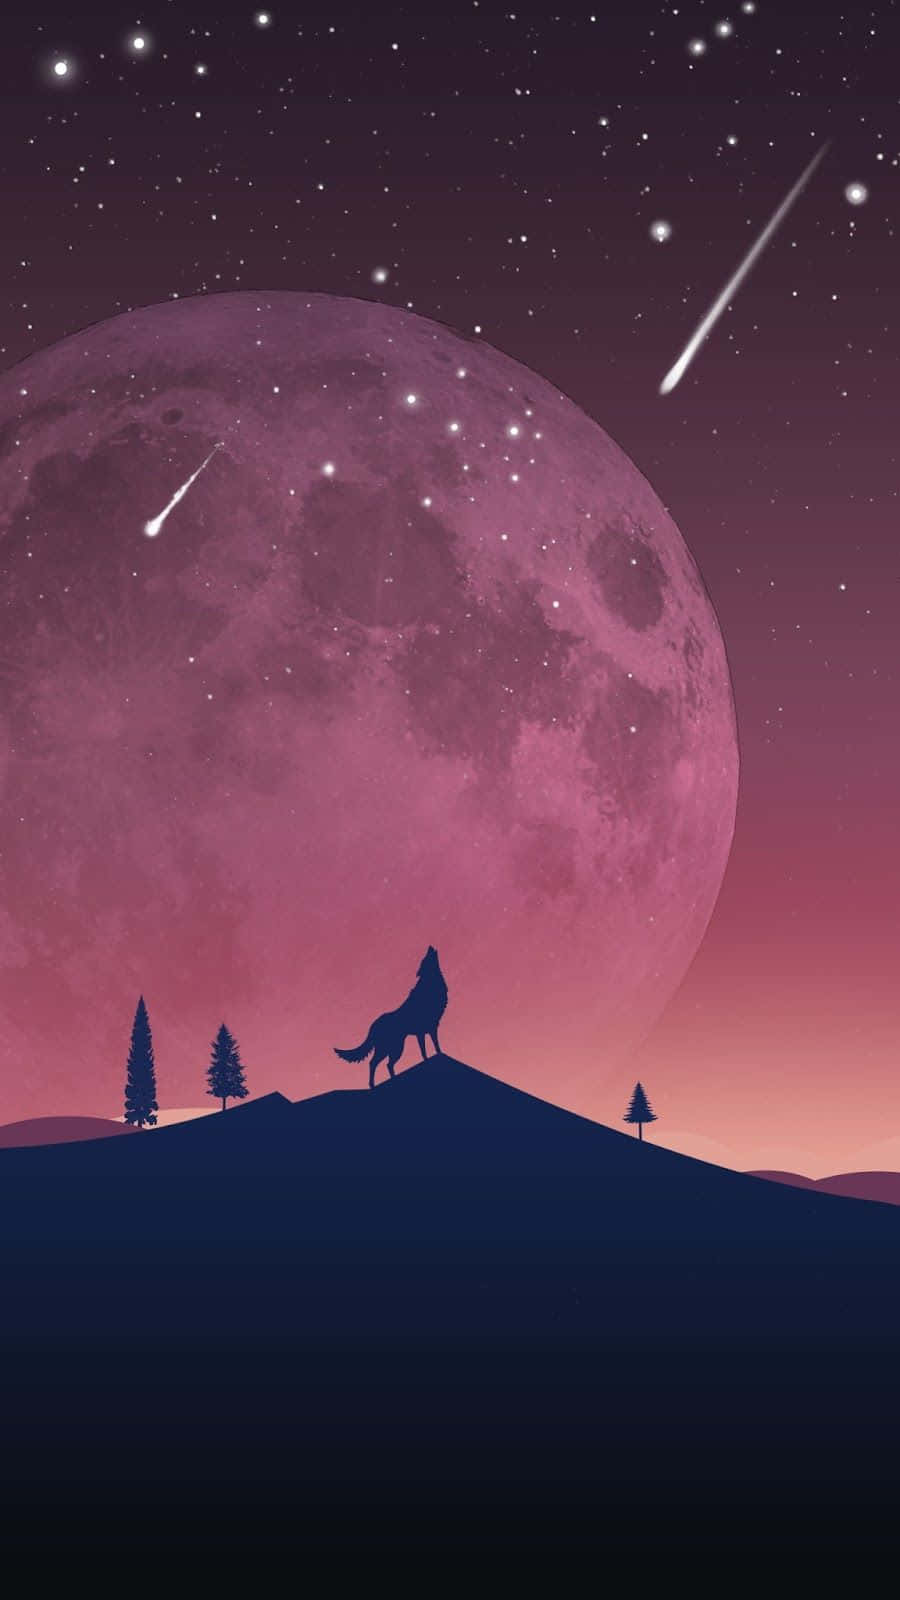 Intergalactic Voyage of the Galaxy Wolves Wallpaper